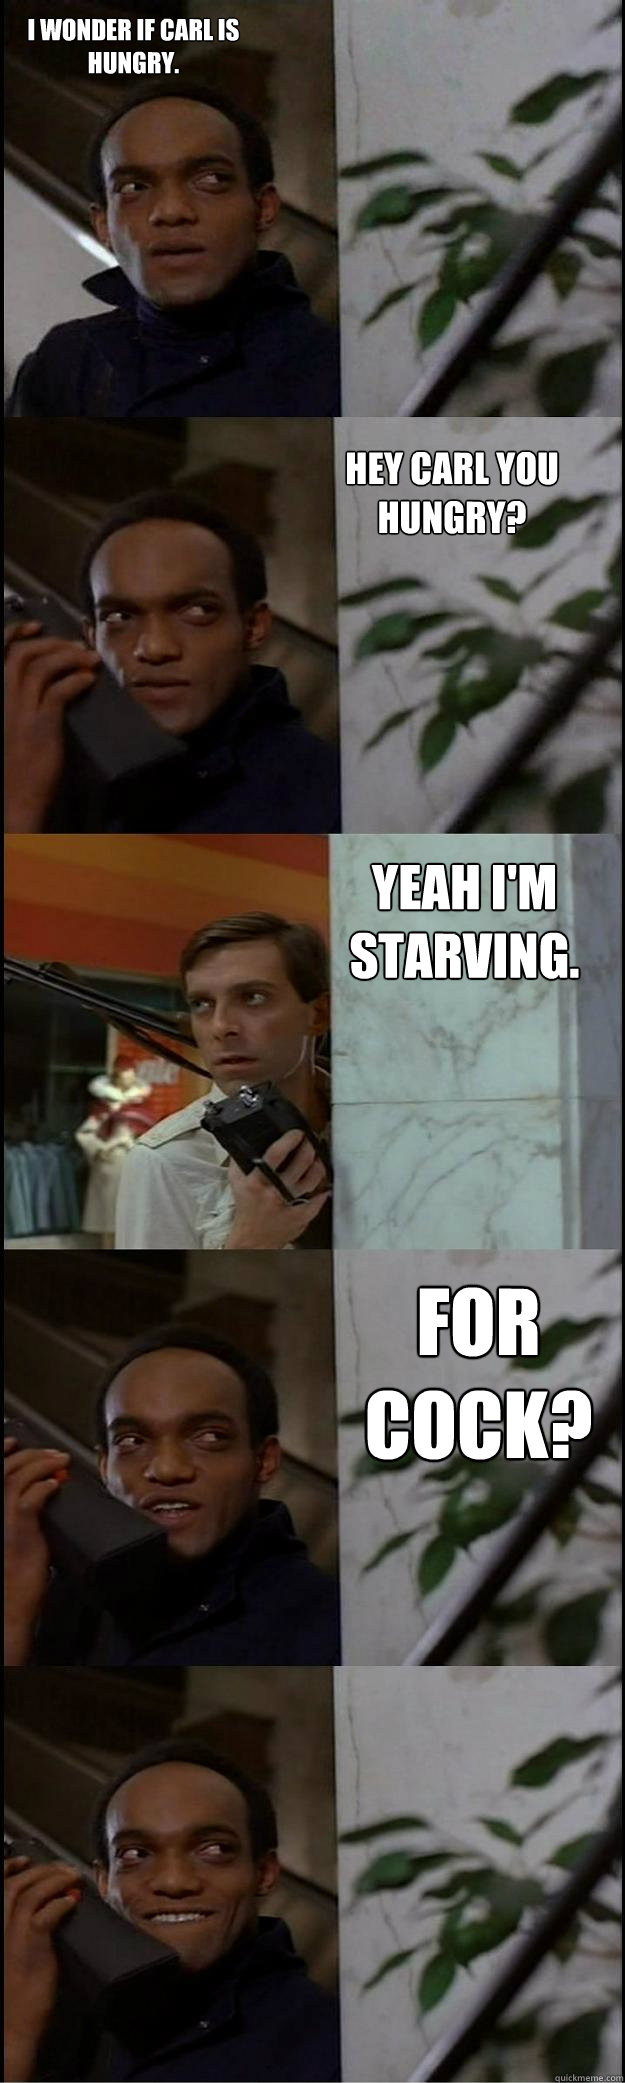 Hey Carl you hungry? Yeah I'm starving.  For Cock? I wonder if Carl is hungry.  Dawn of the Dead